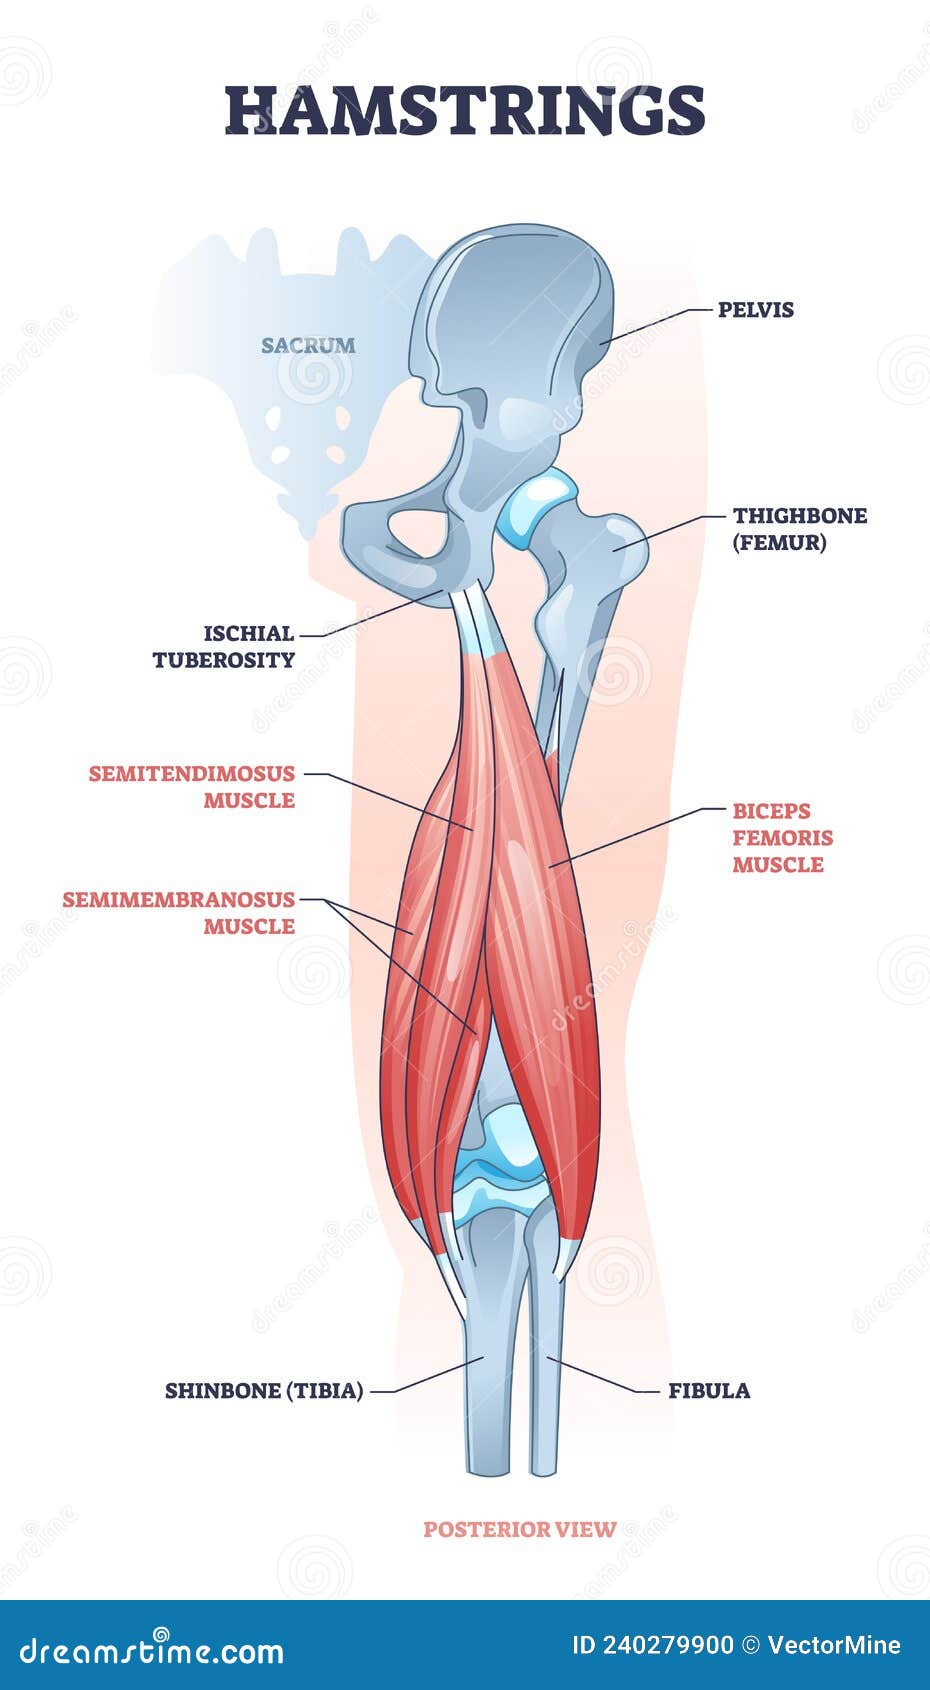 hamstring posterior muscle anatomy with bones and ligaments outline diagram